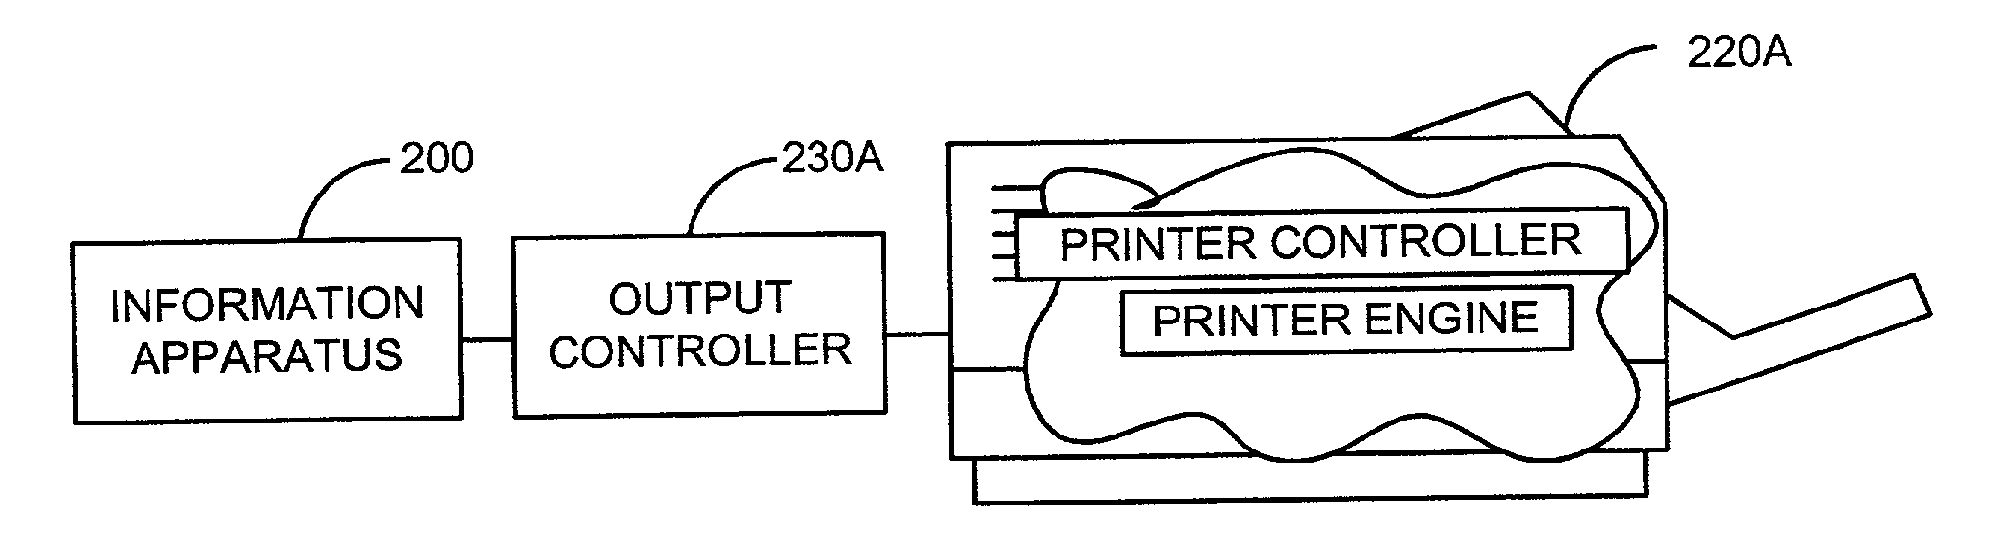 Wireless information apparatus for universal data output